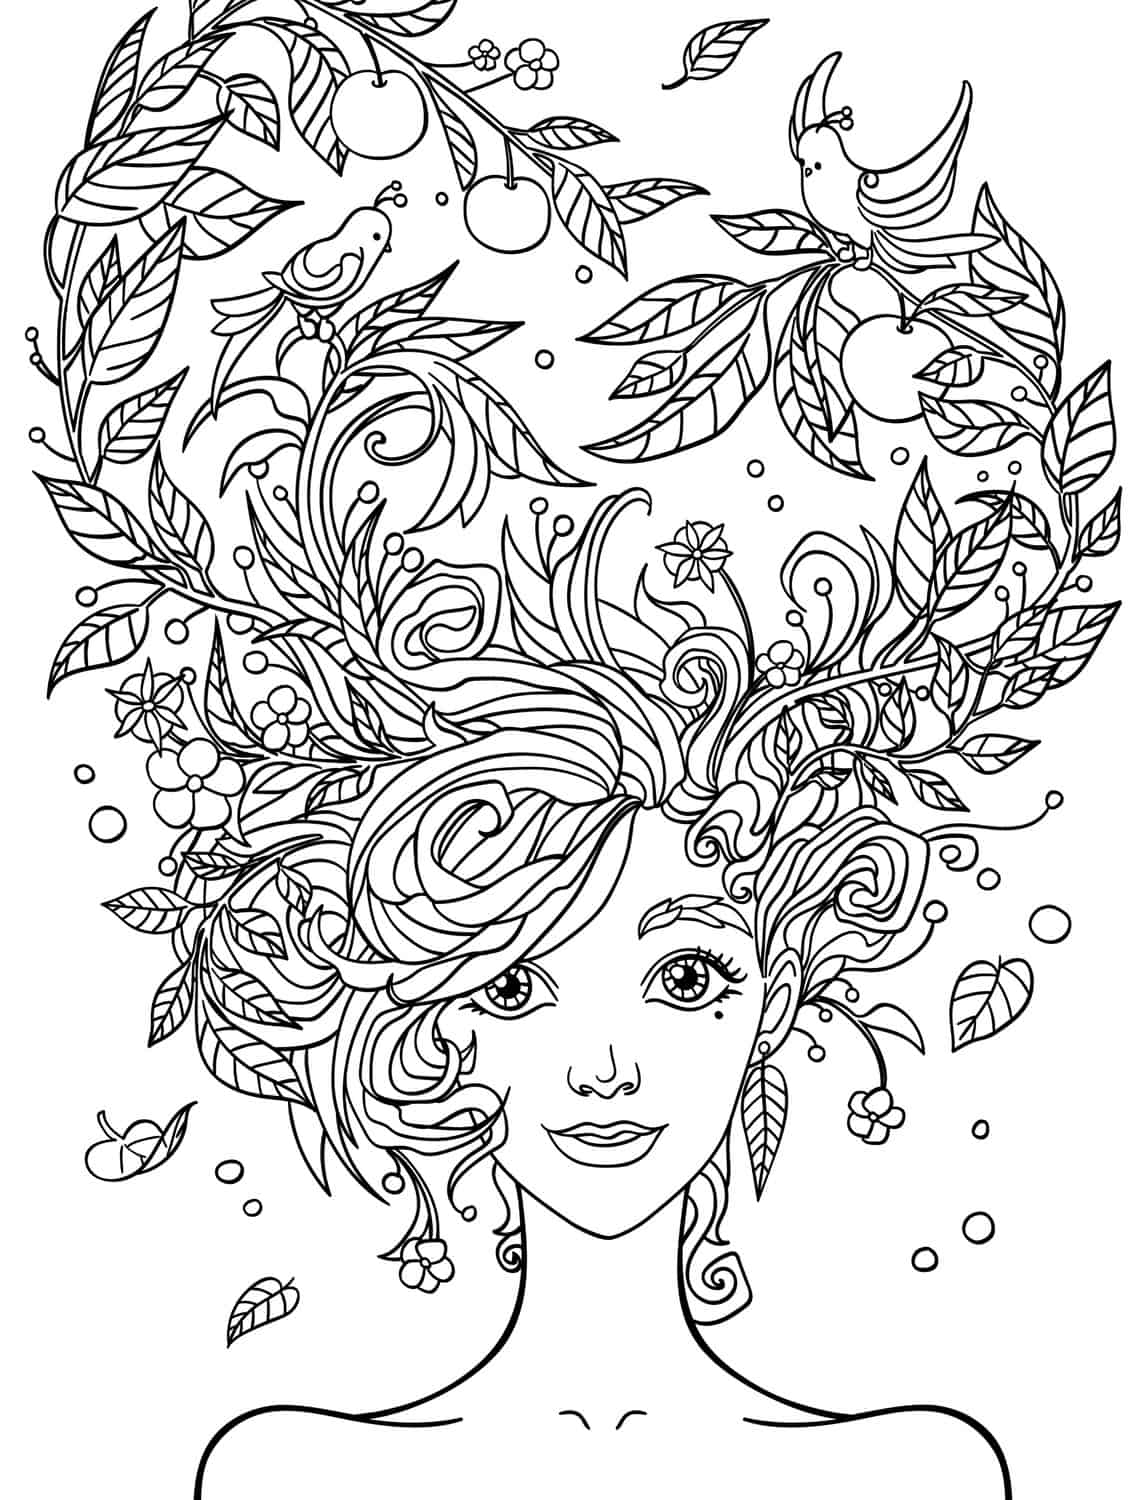 10-crazy-hair-adult-coloring-pages-page-5-of-12-nerdy-mamma